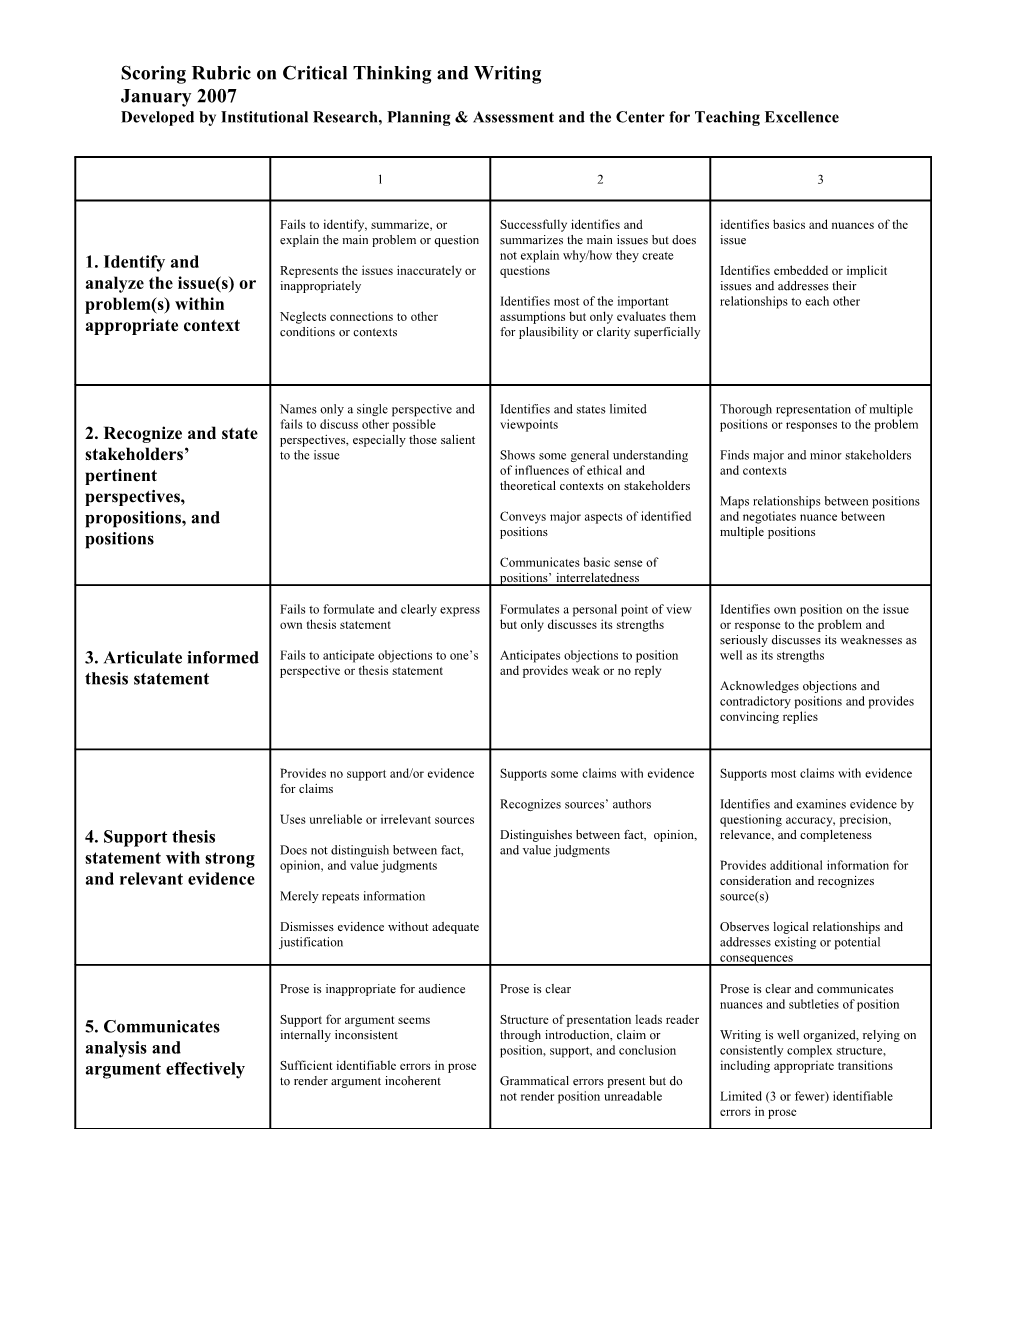 Critical Thinking and Research Skills DRAFT Rubric June 6, 2005 Presentation of Research